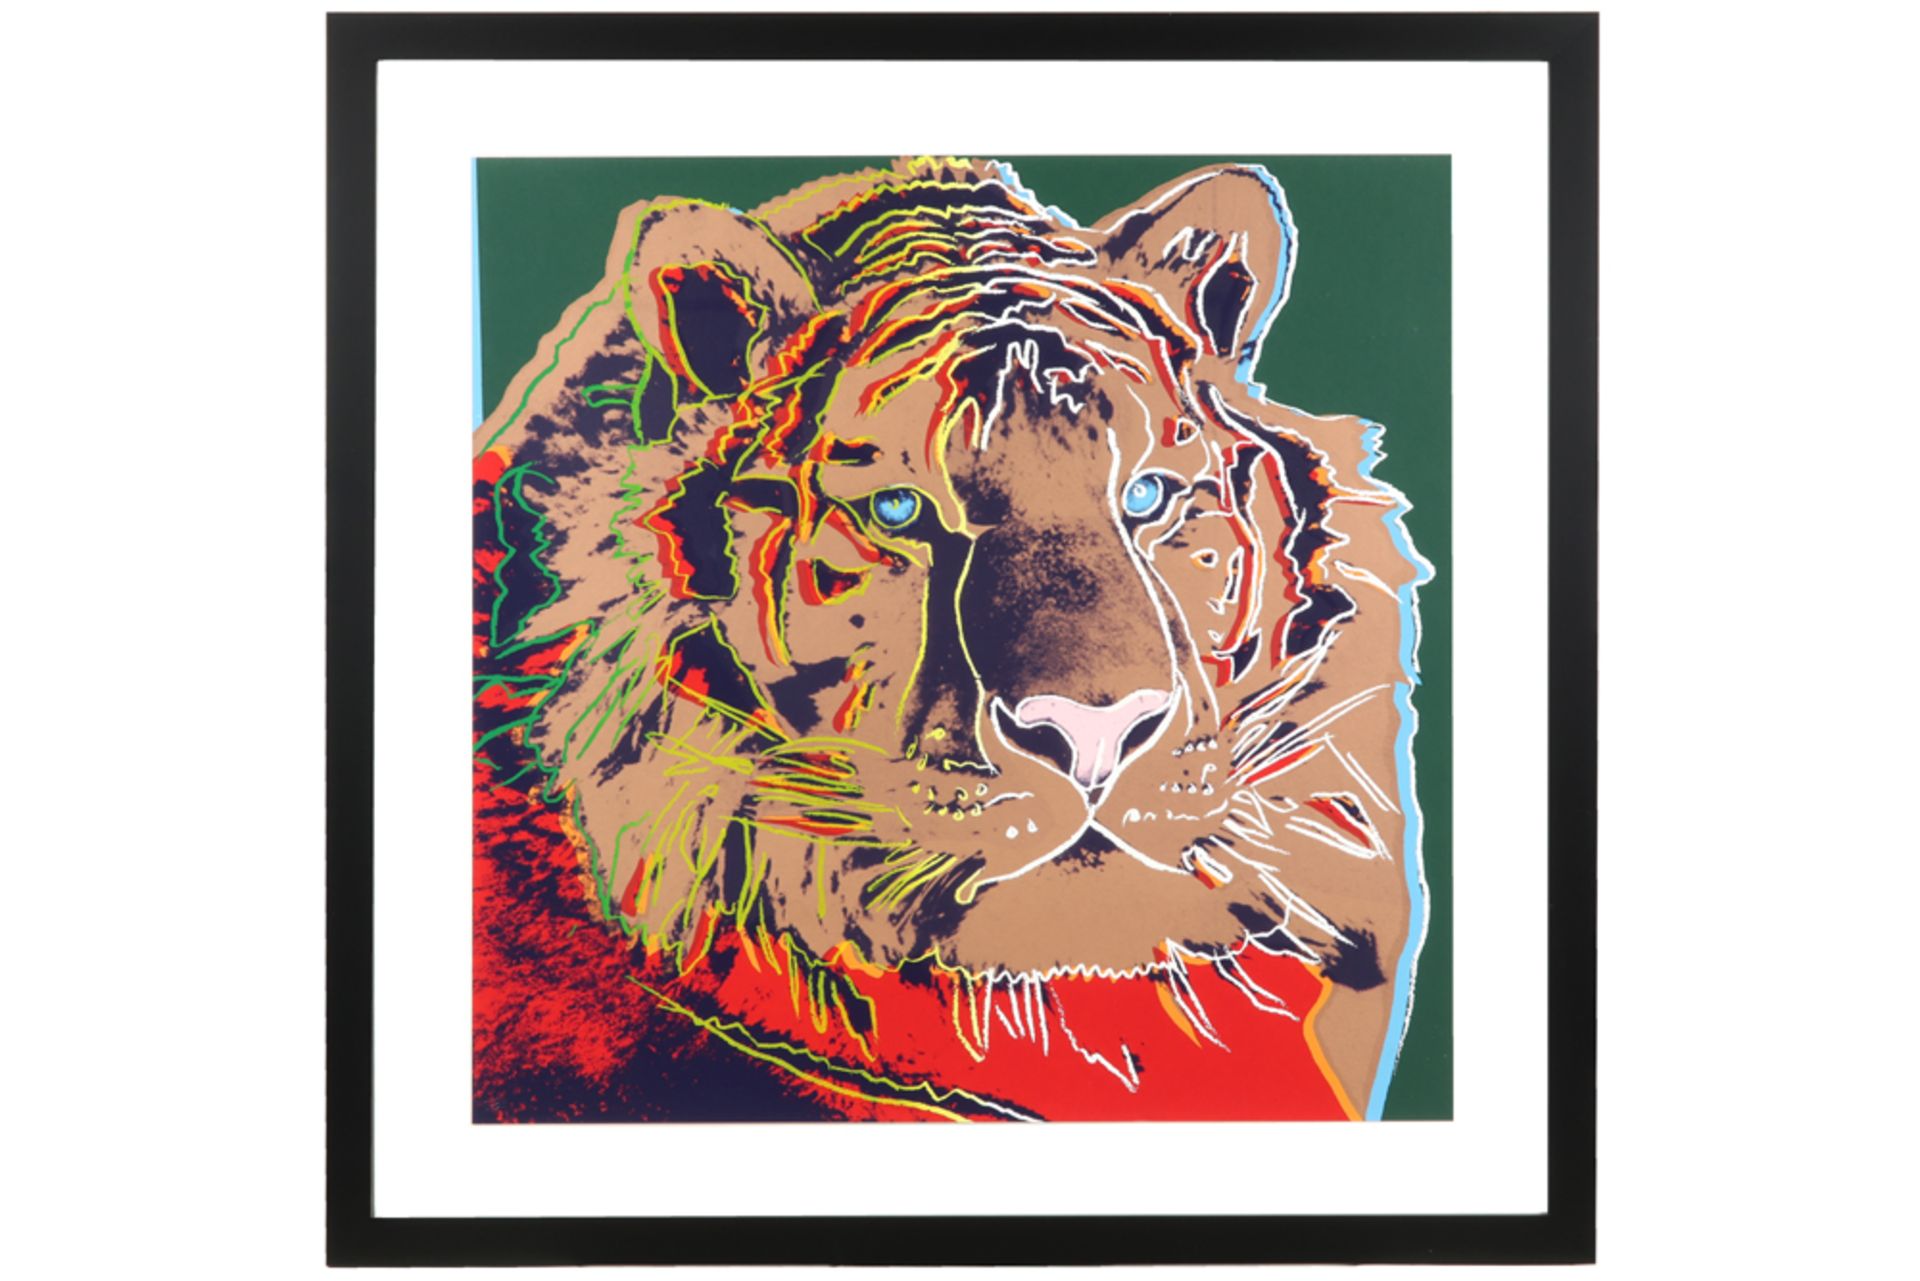 Andy Warhol "Tigre" silkscreen from the series "Endangered Species" with the blind stamp of Warhol's - Image 2 of 4